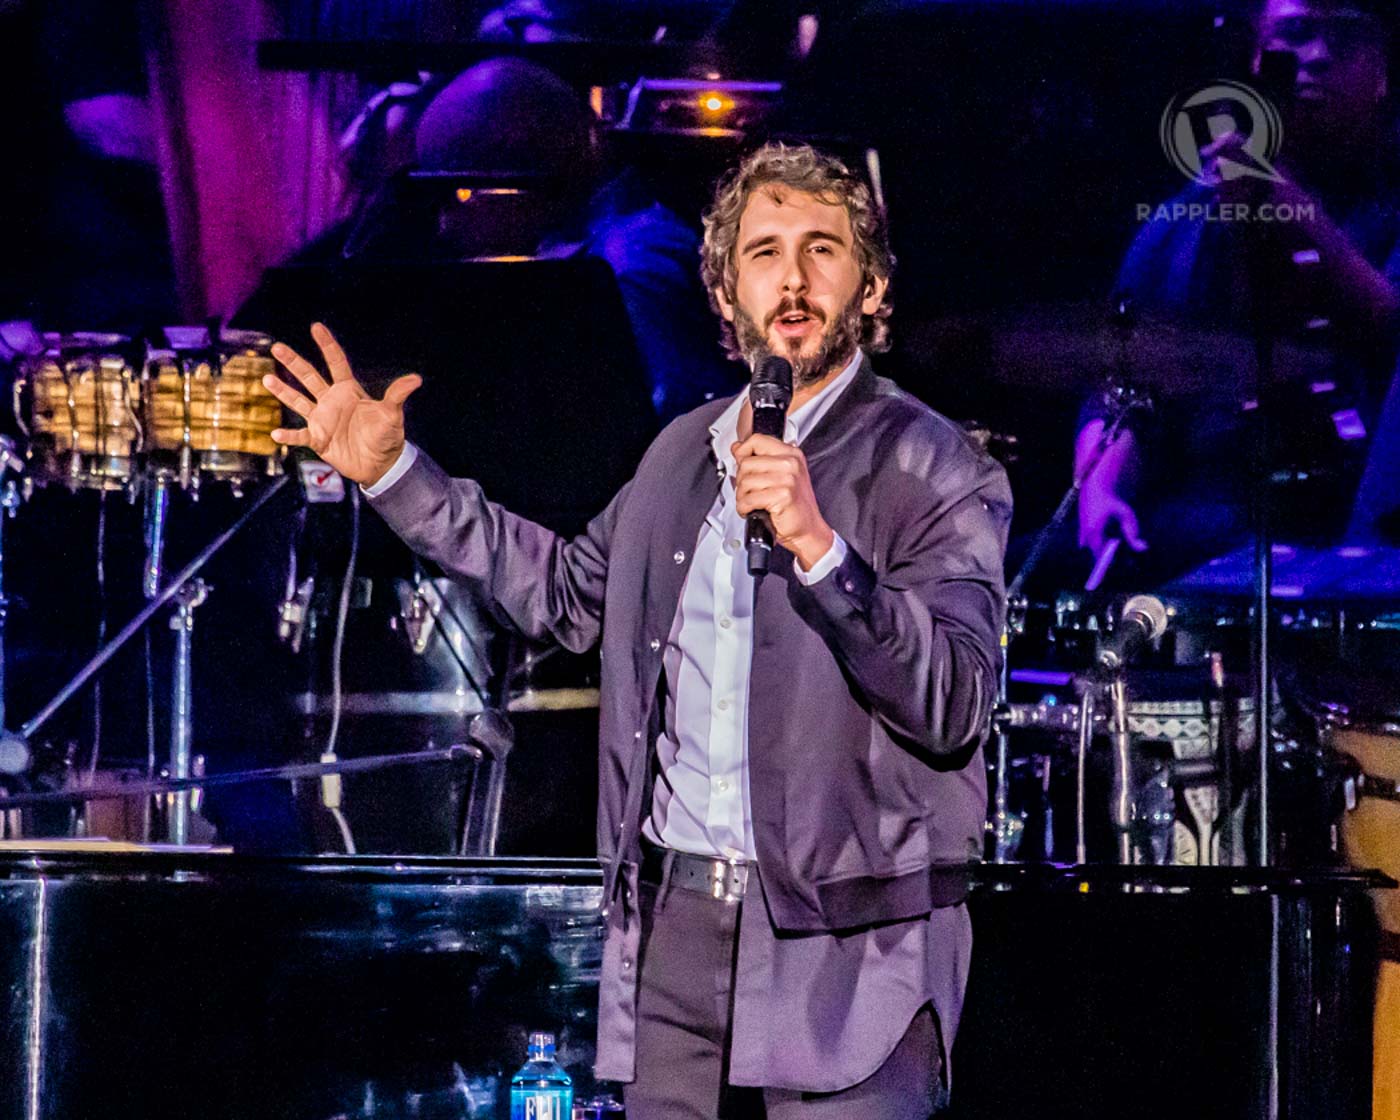 ONE NIGHT MANILA. Josh Groban serenades the crowd during his concert. All photos by Stephen Lavoie/Rappler  